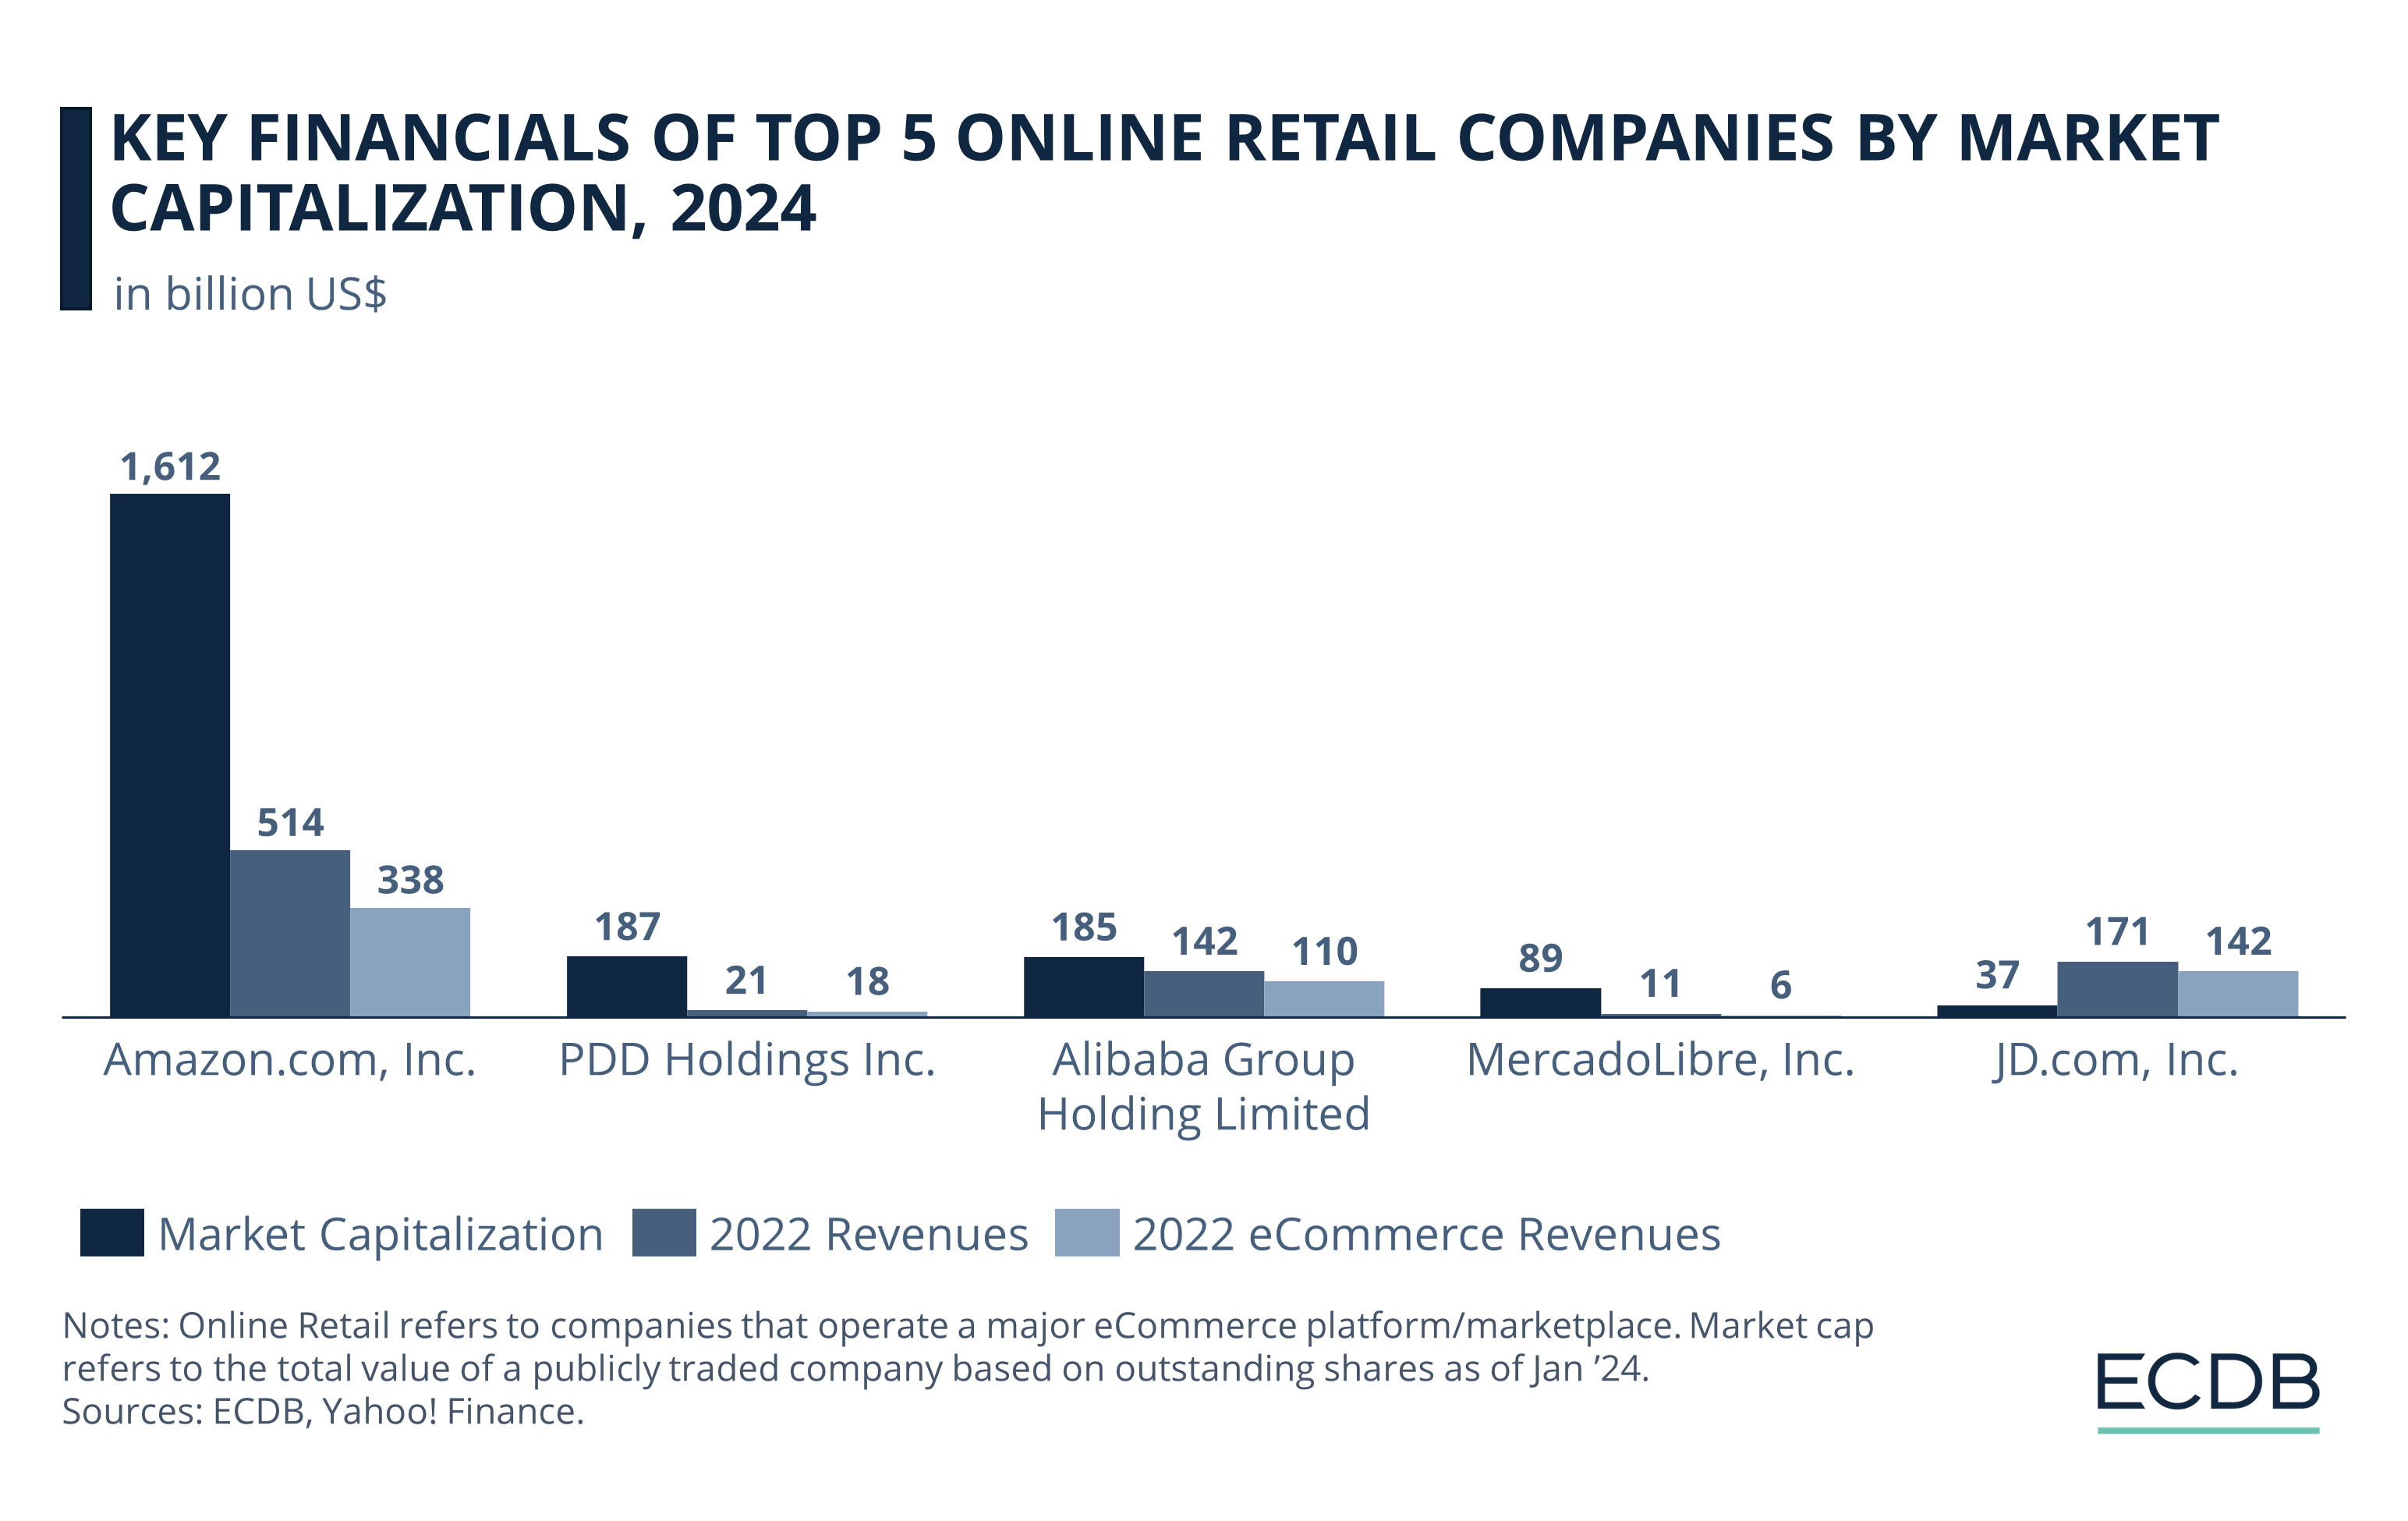 Key Financials of Top 5 Online Retail Companies by Market Capitalization, 2024